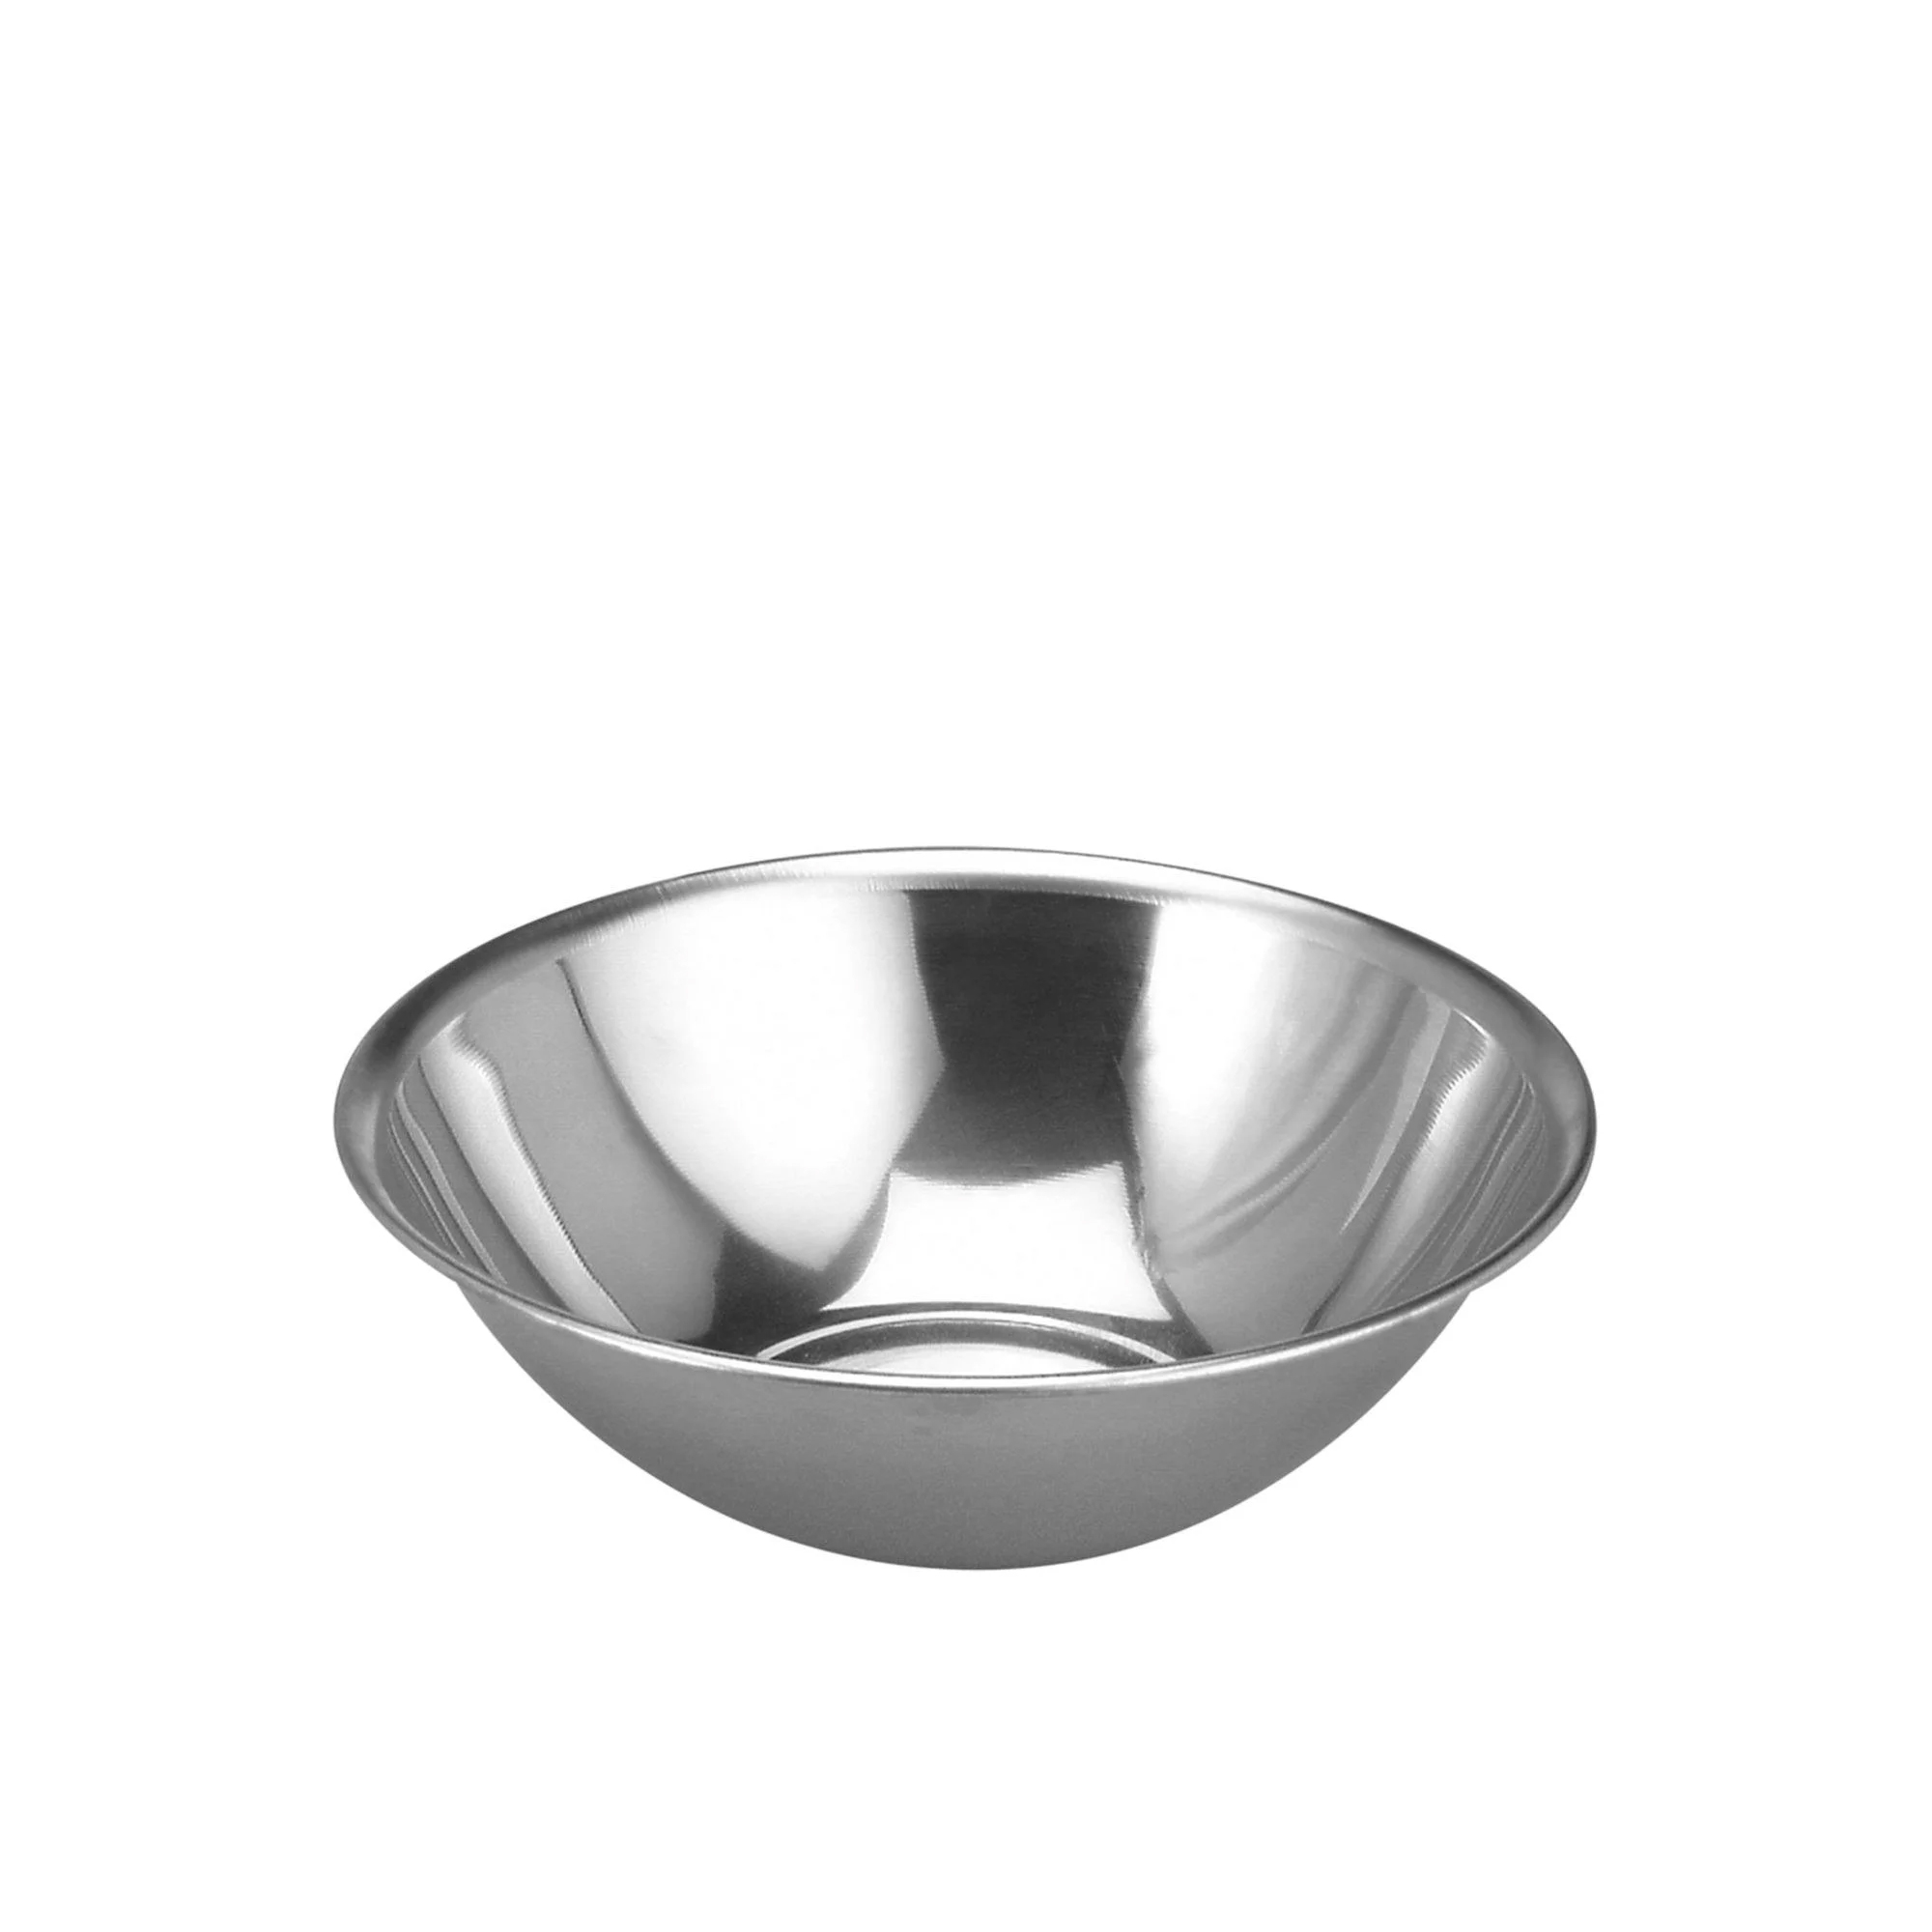 Chef Inox Stainless Steel Mixing Bowl 19.5cm - 1.1L Image 1